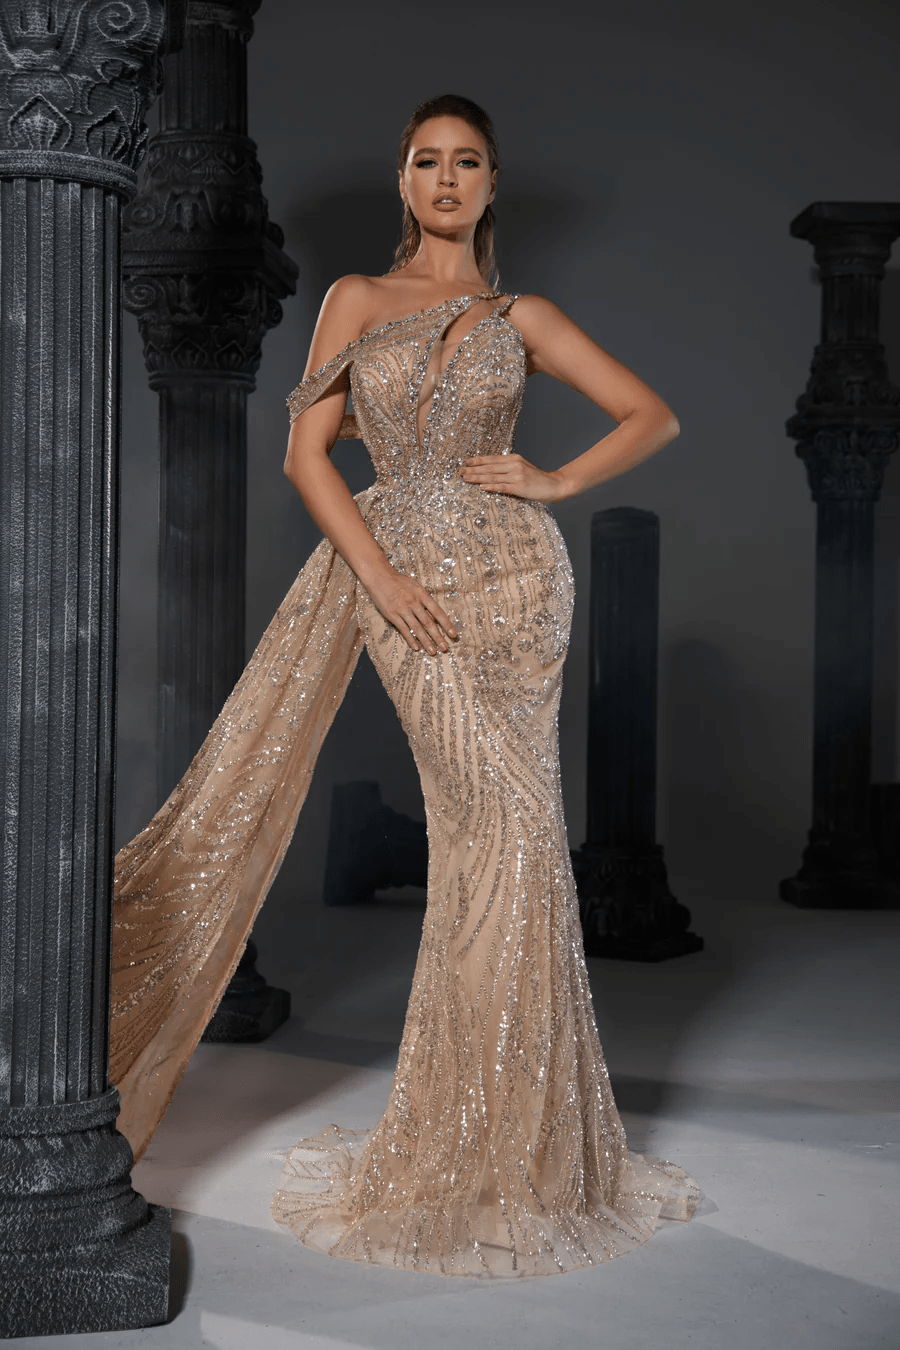 Elegant Champagne Sequin Evening Gown with Asymmetric Off-Shoulder and Draped Detail - Designer Sequin Gown and Glitter Dress Plus Size - WonderlandByLilian